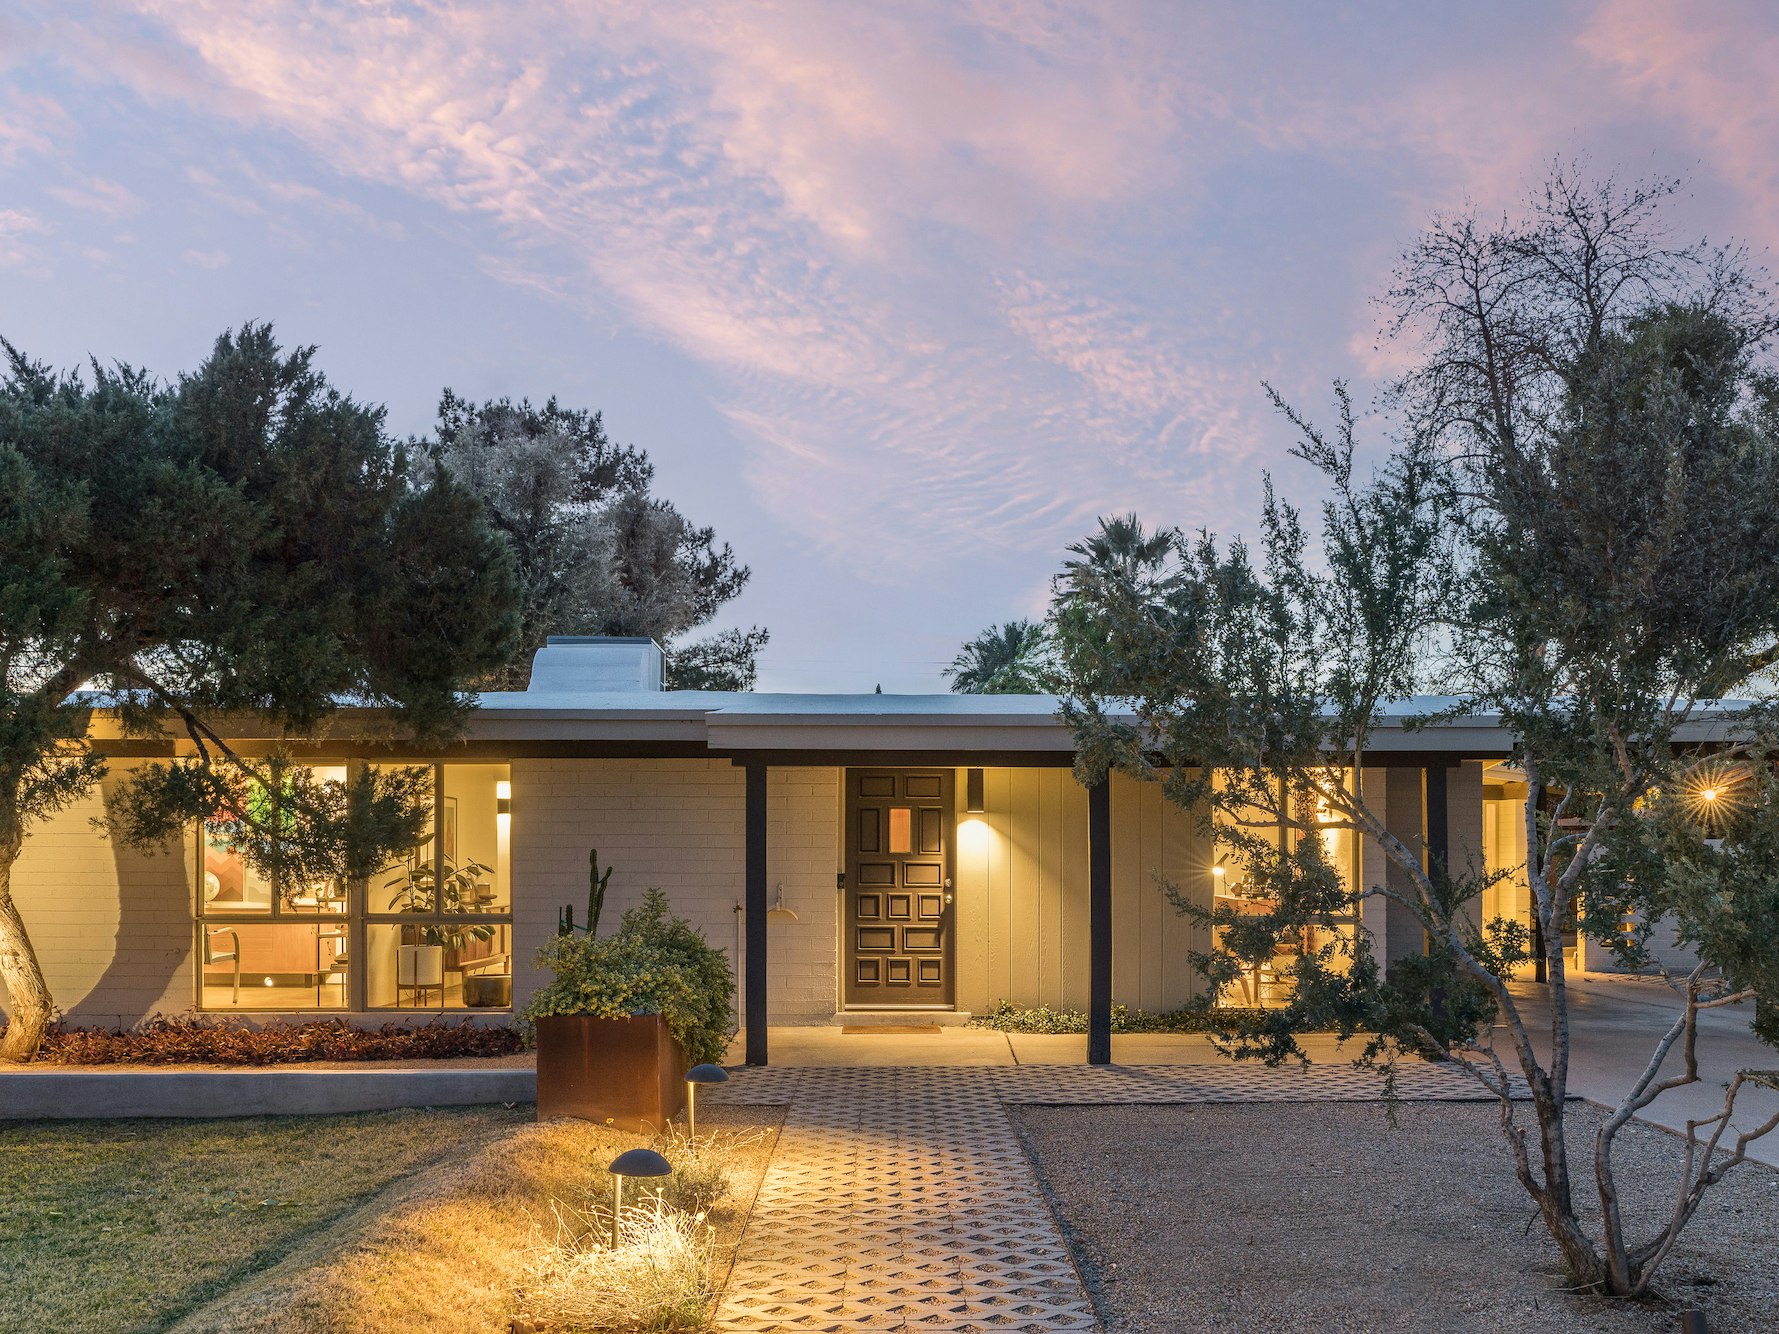 A Signature Midcentury Modern By Architect Ralph Haver Seeks 1 1m In Phoenix Dwell